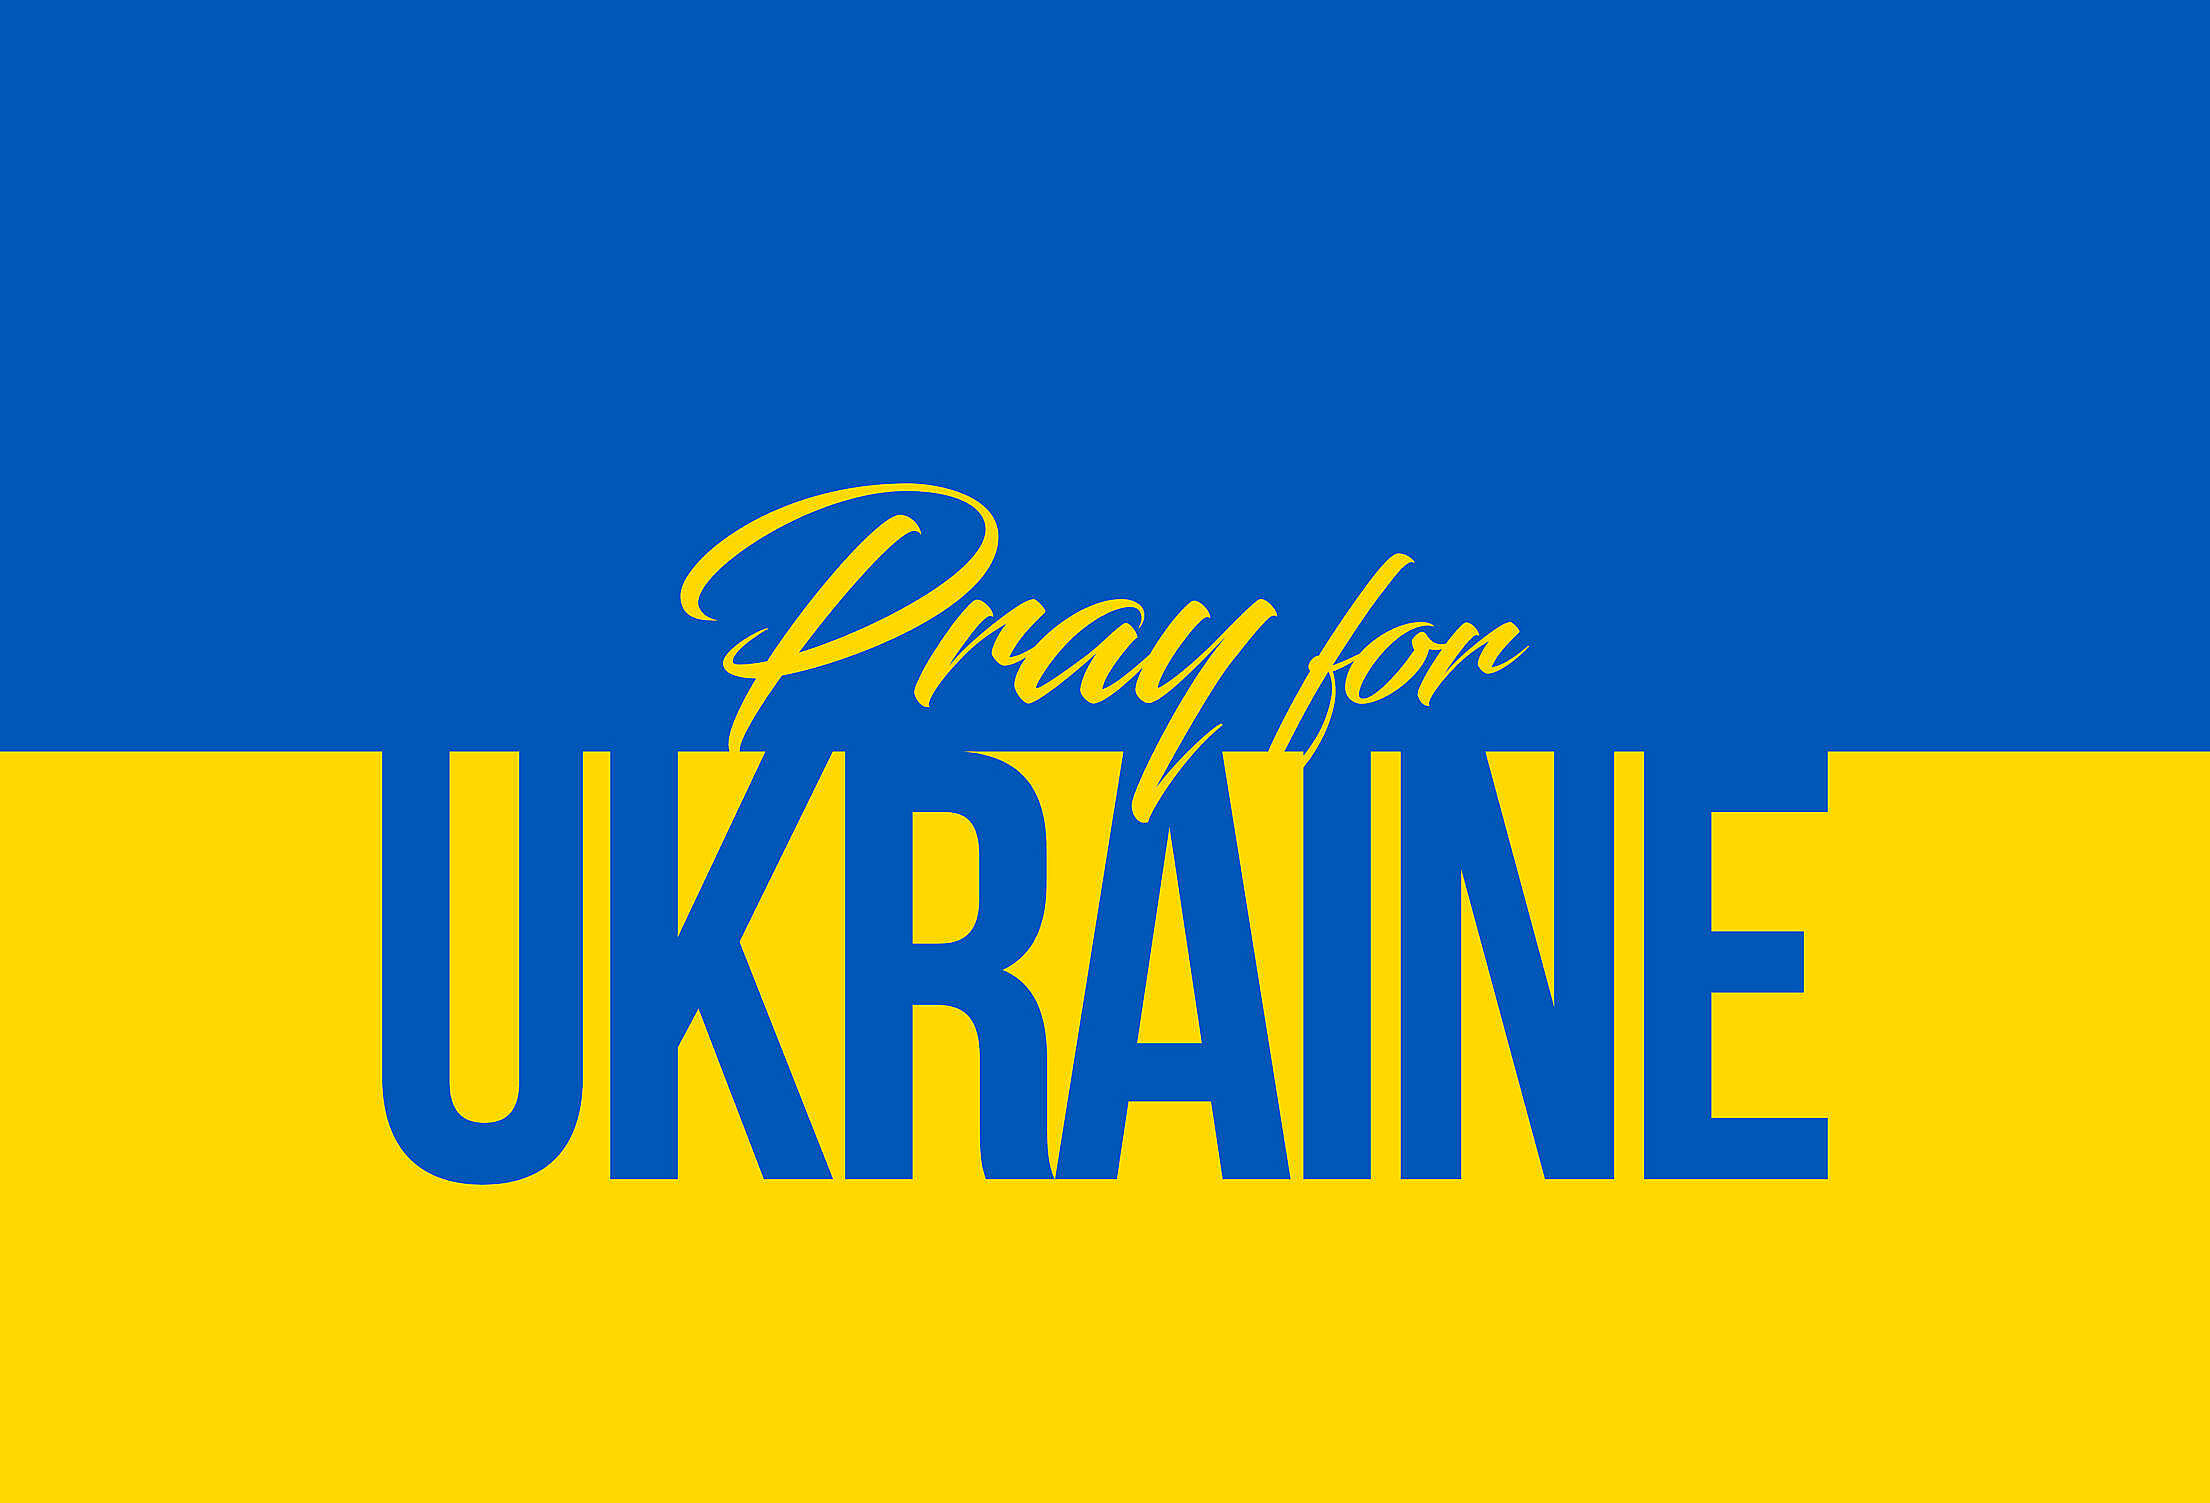 Pray For Ukraine Handwritten with Flag Colors Free Stock Photo